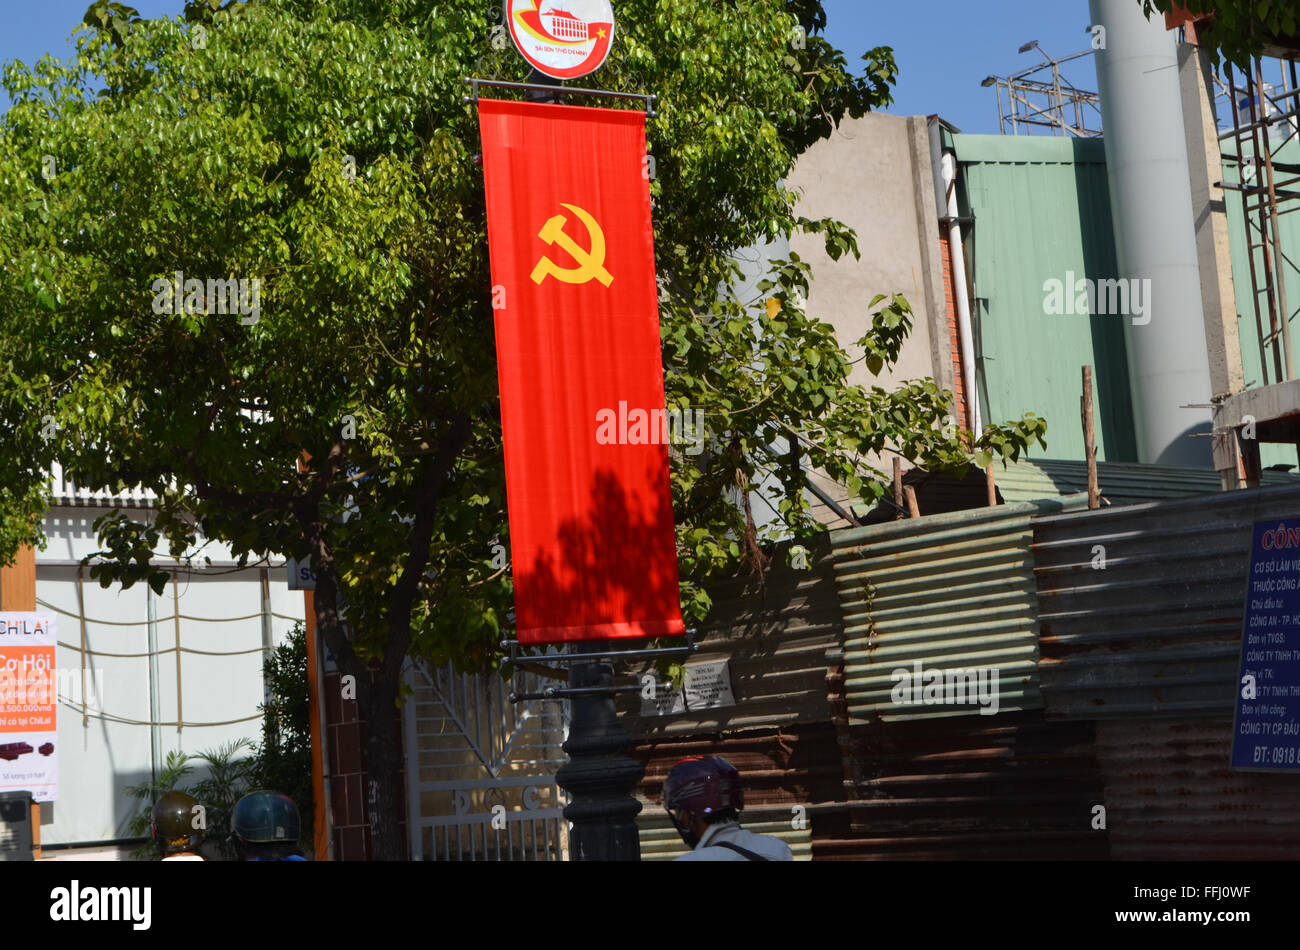 Saigon, Viet Nam. They love their flag in Saigon,they display it on every lamp post, and tree, and other wayside pillar that can Stock Photo